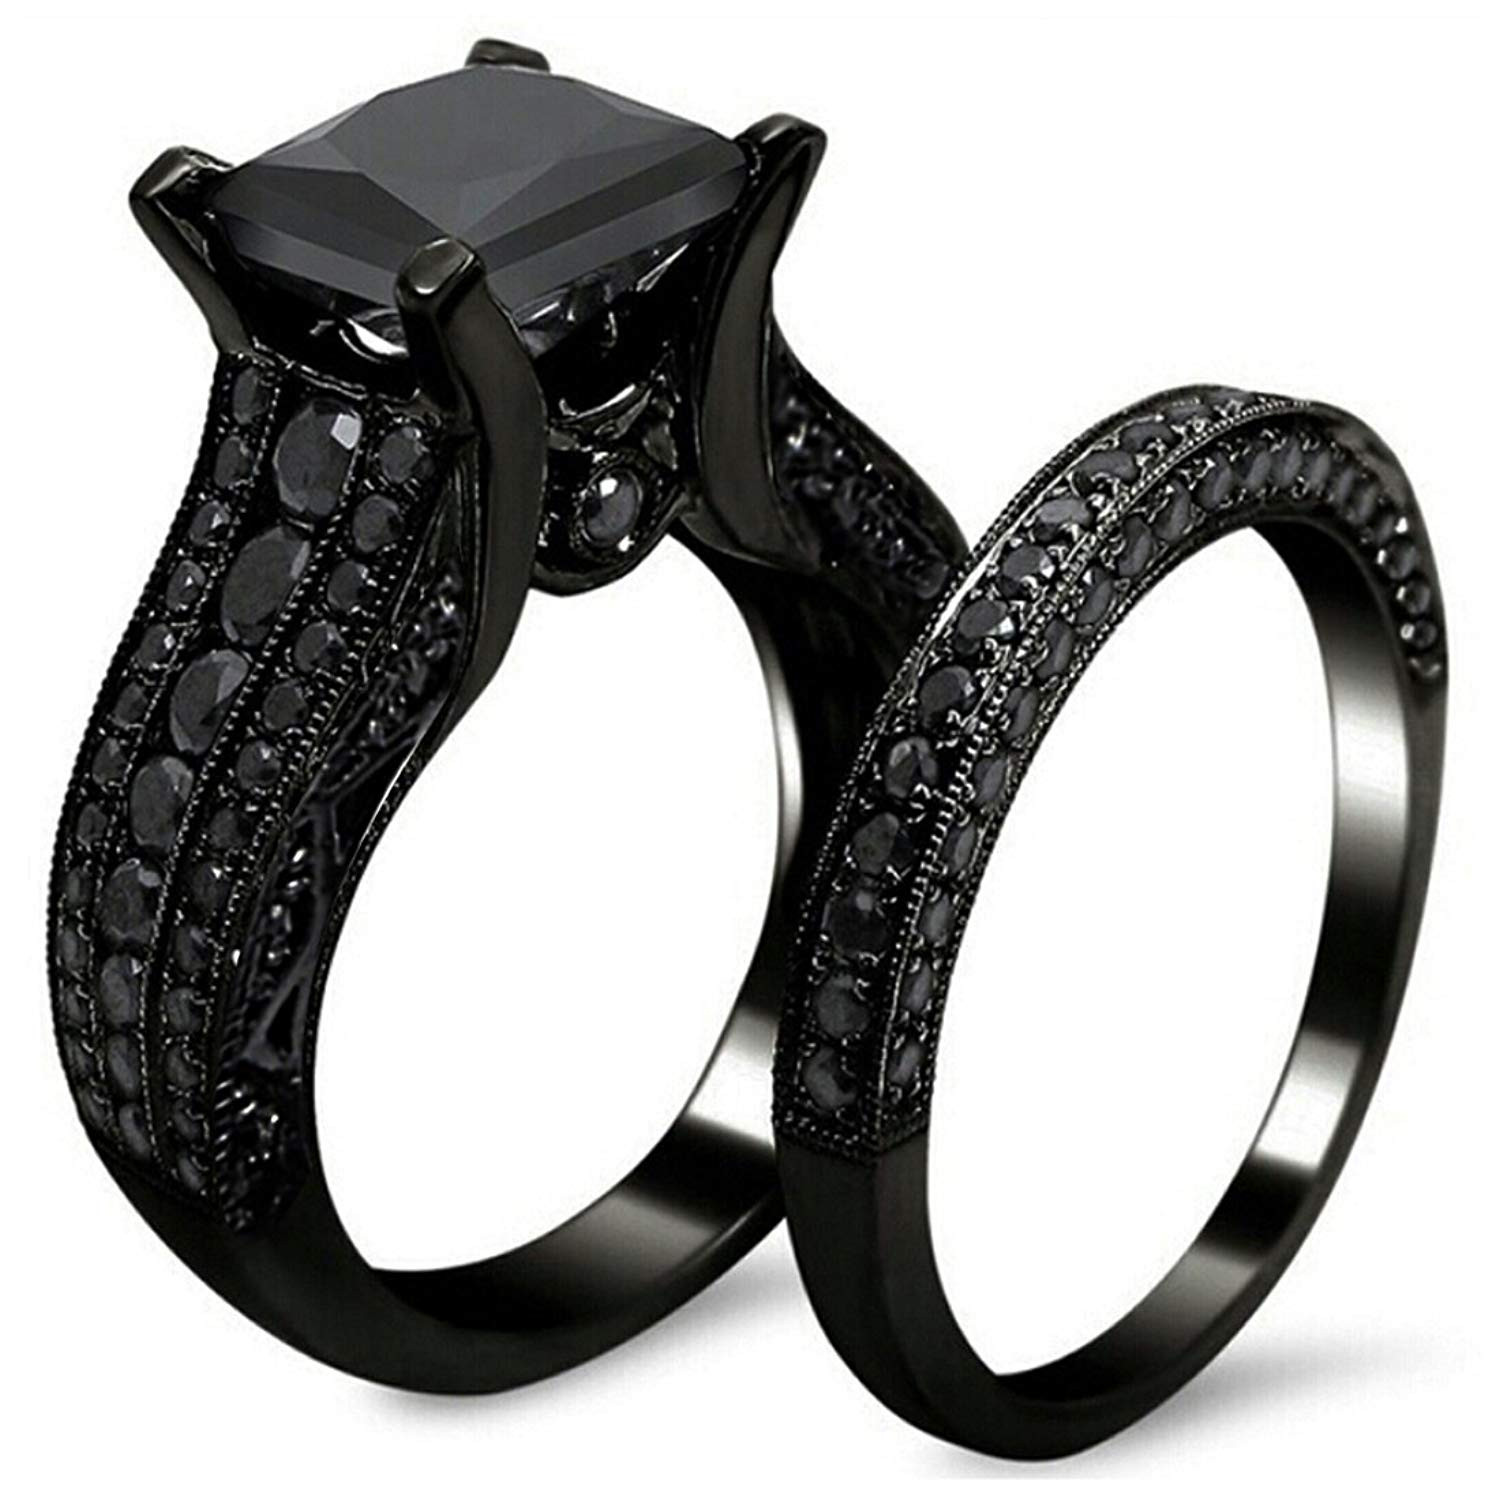 The Best Womens Black Wedding Rings - Home, Family, Style and Art Ideas